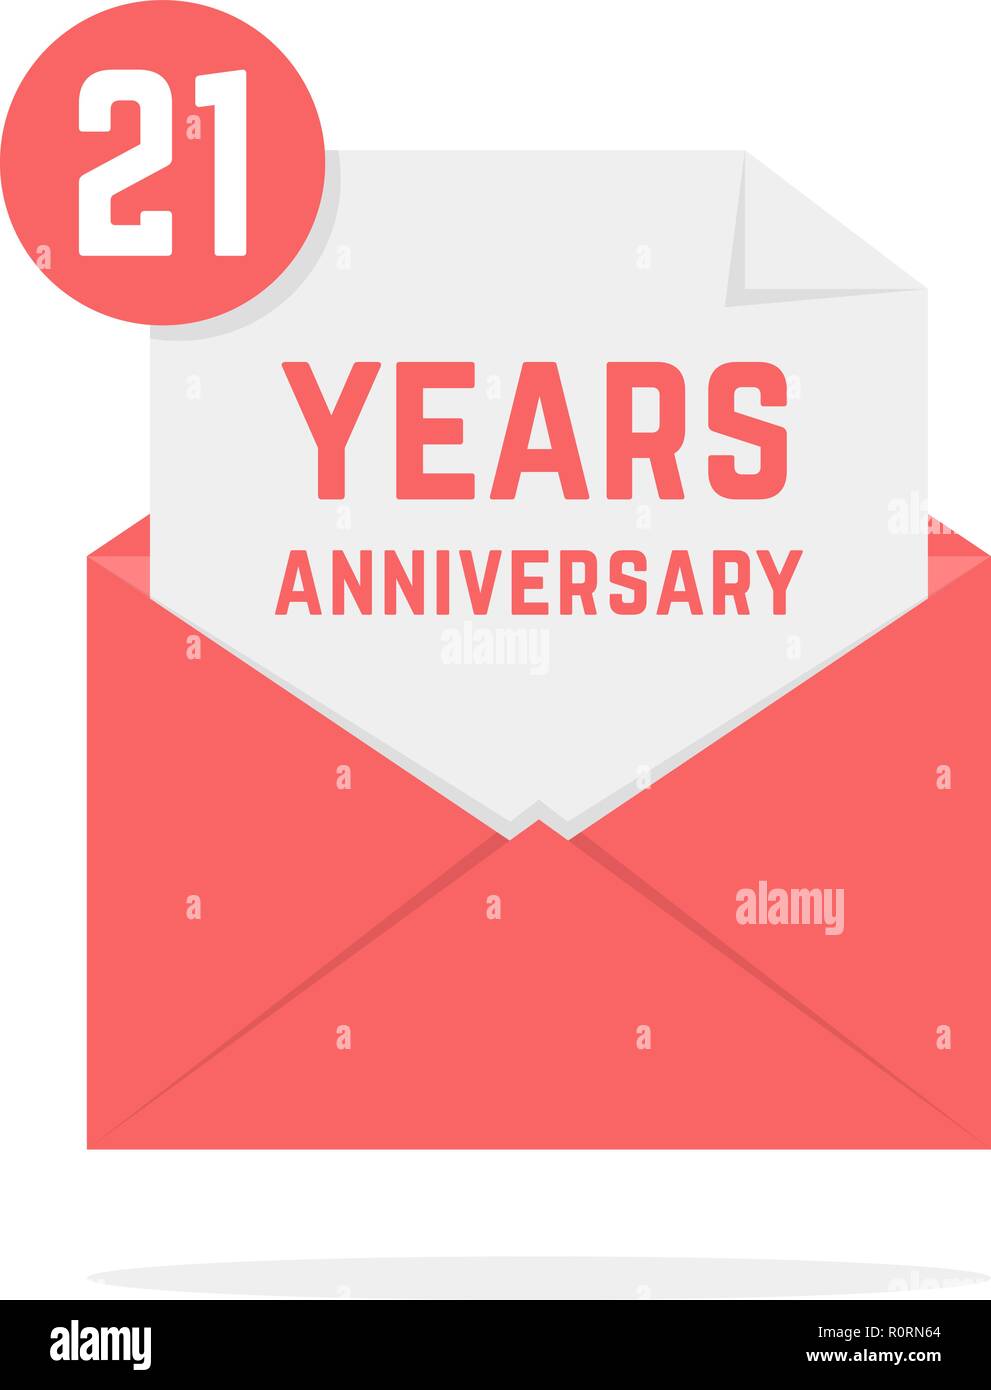 21 years anniversary icon in red open letter Stock Vector